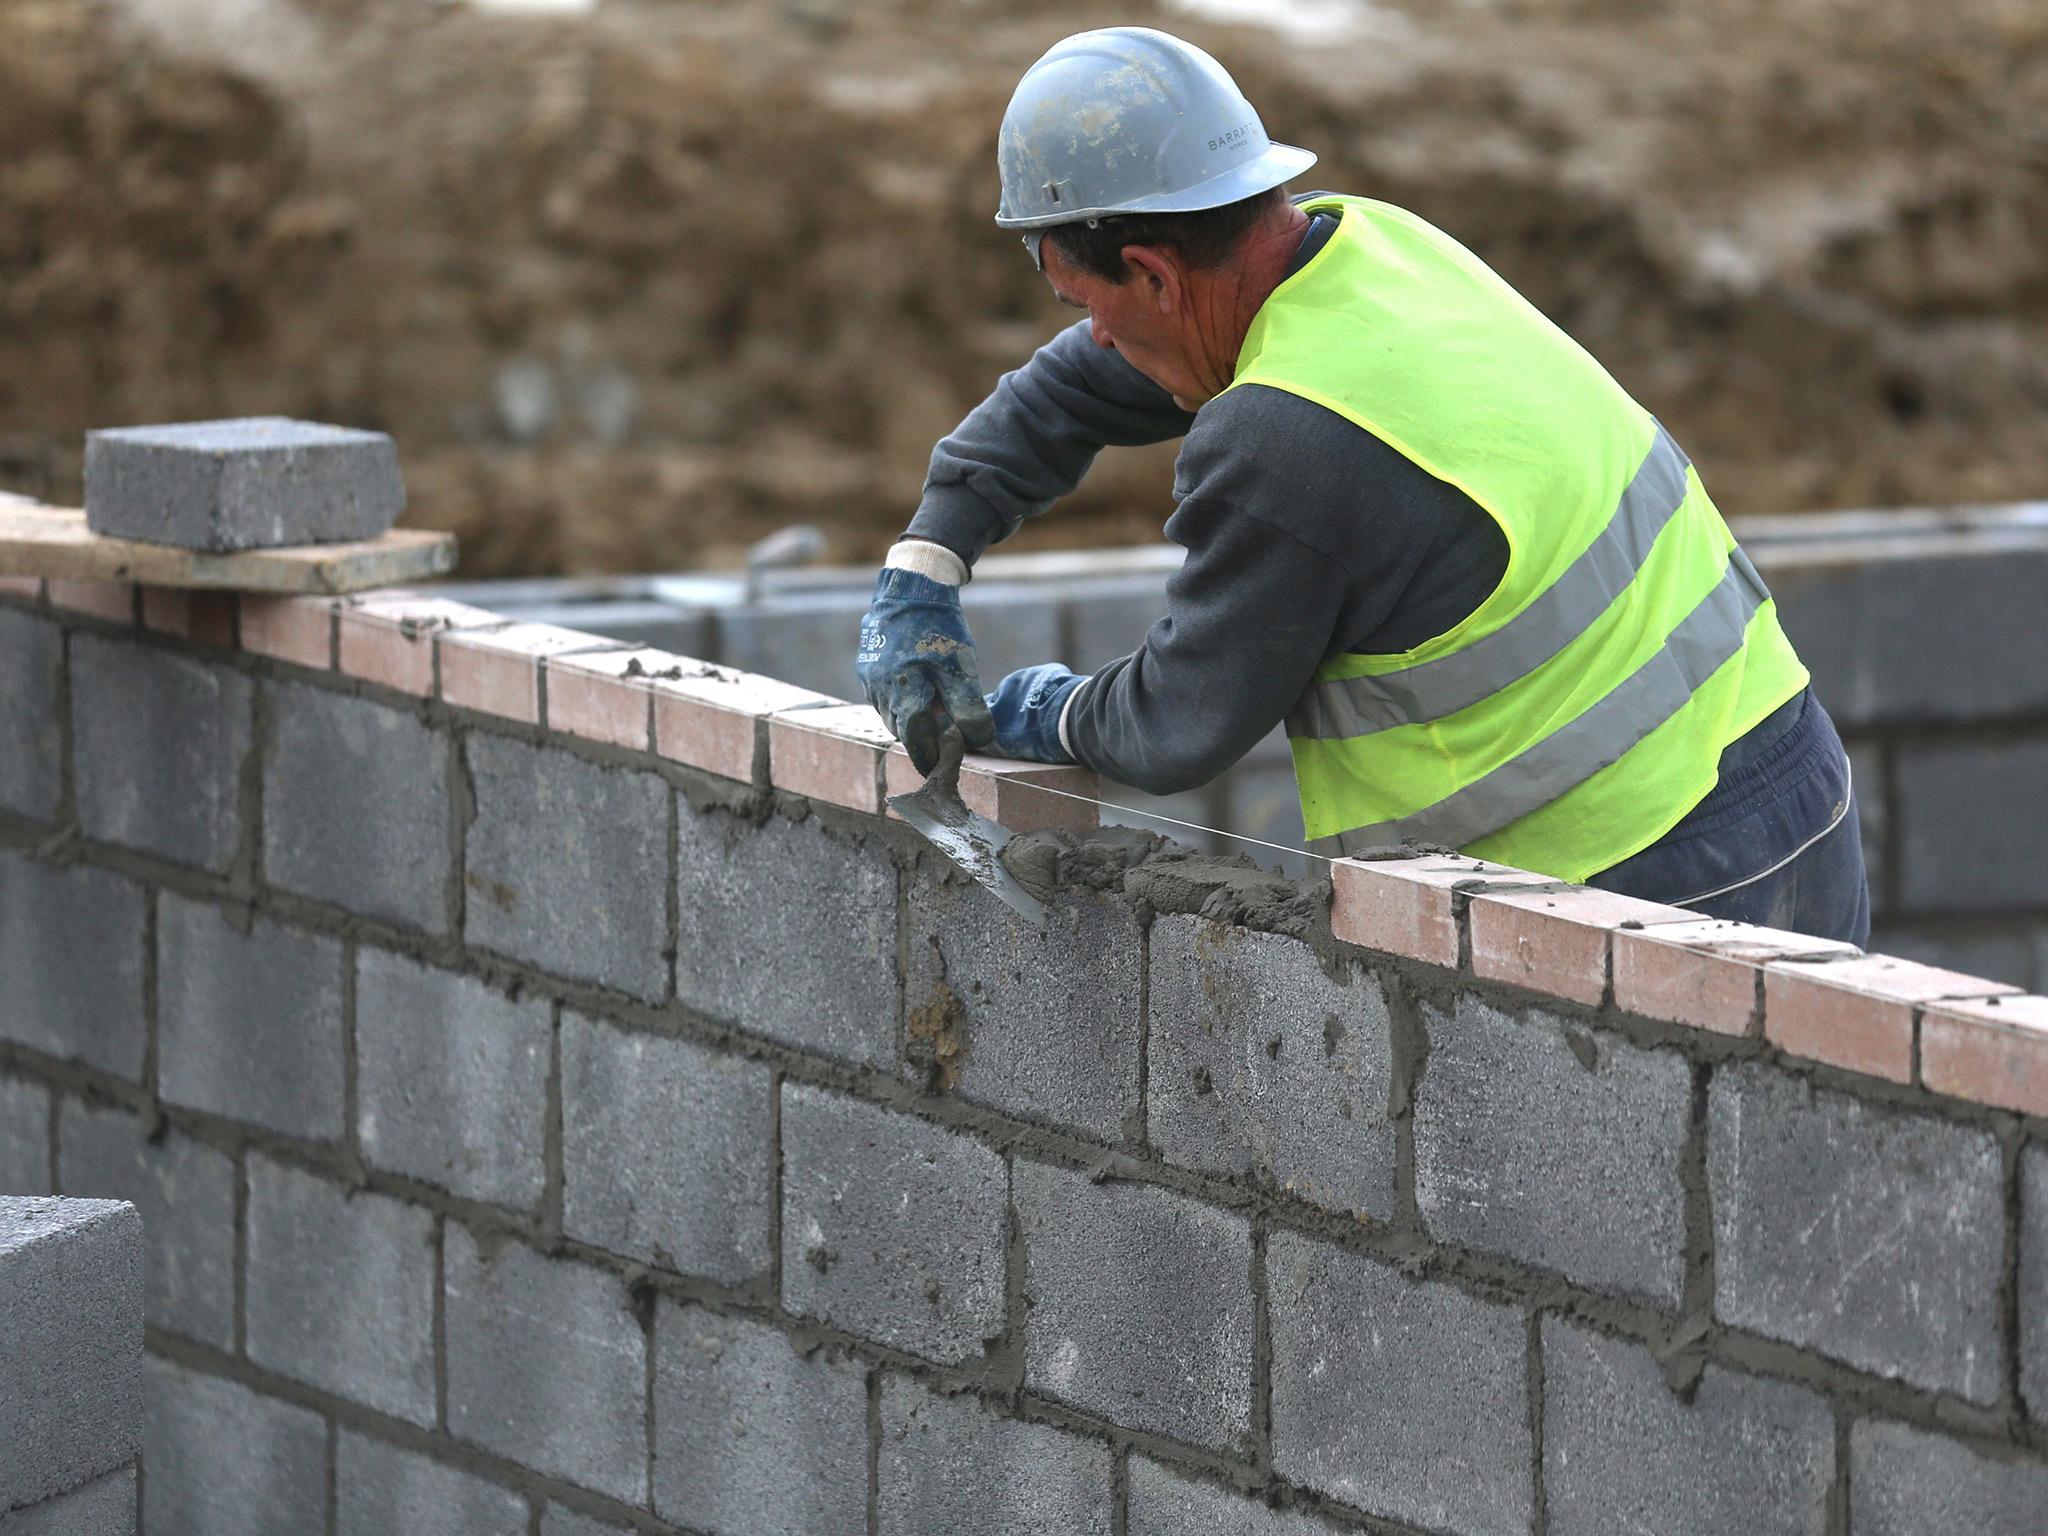 A bricklayer contributes to the construction of a home